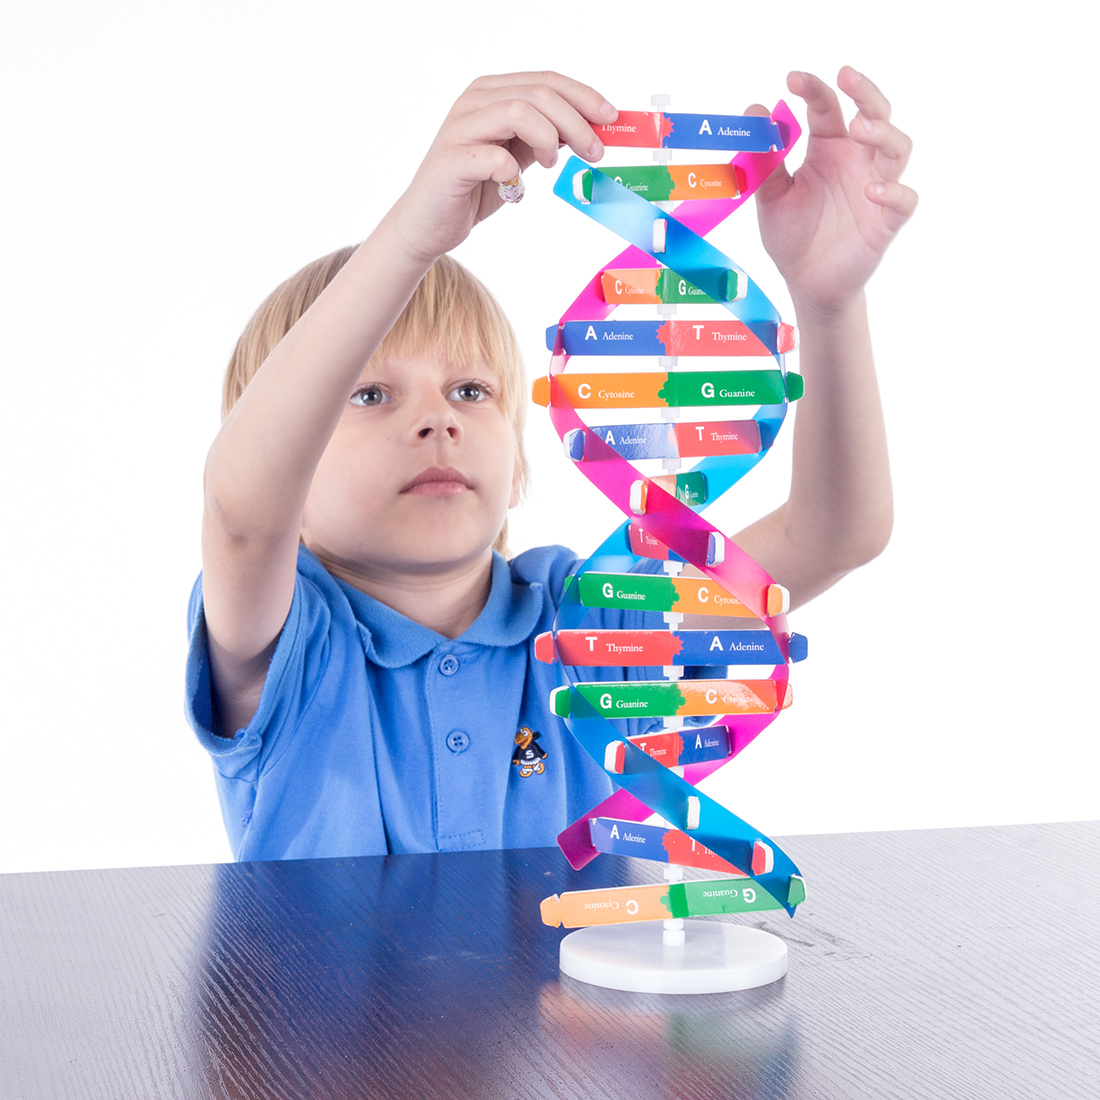 Human Genes DNA Models Double Helix Science Toys Teaching Learning EducationMFS 